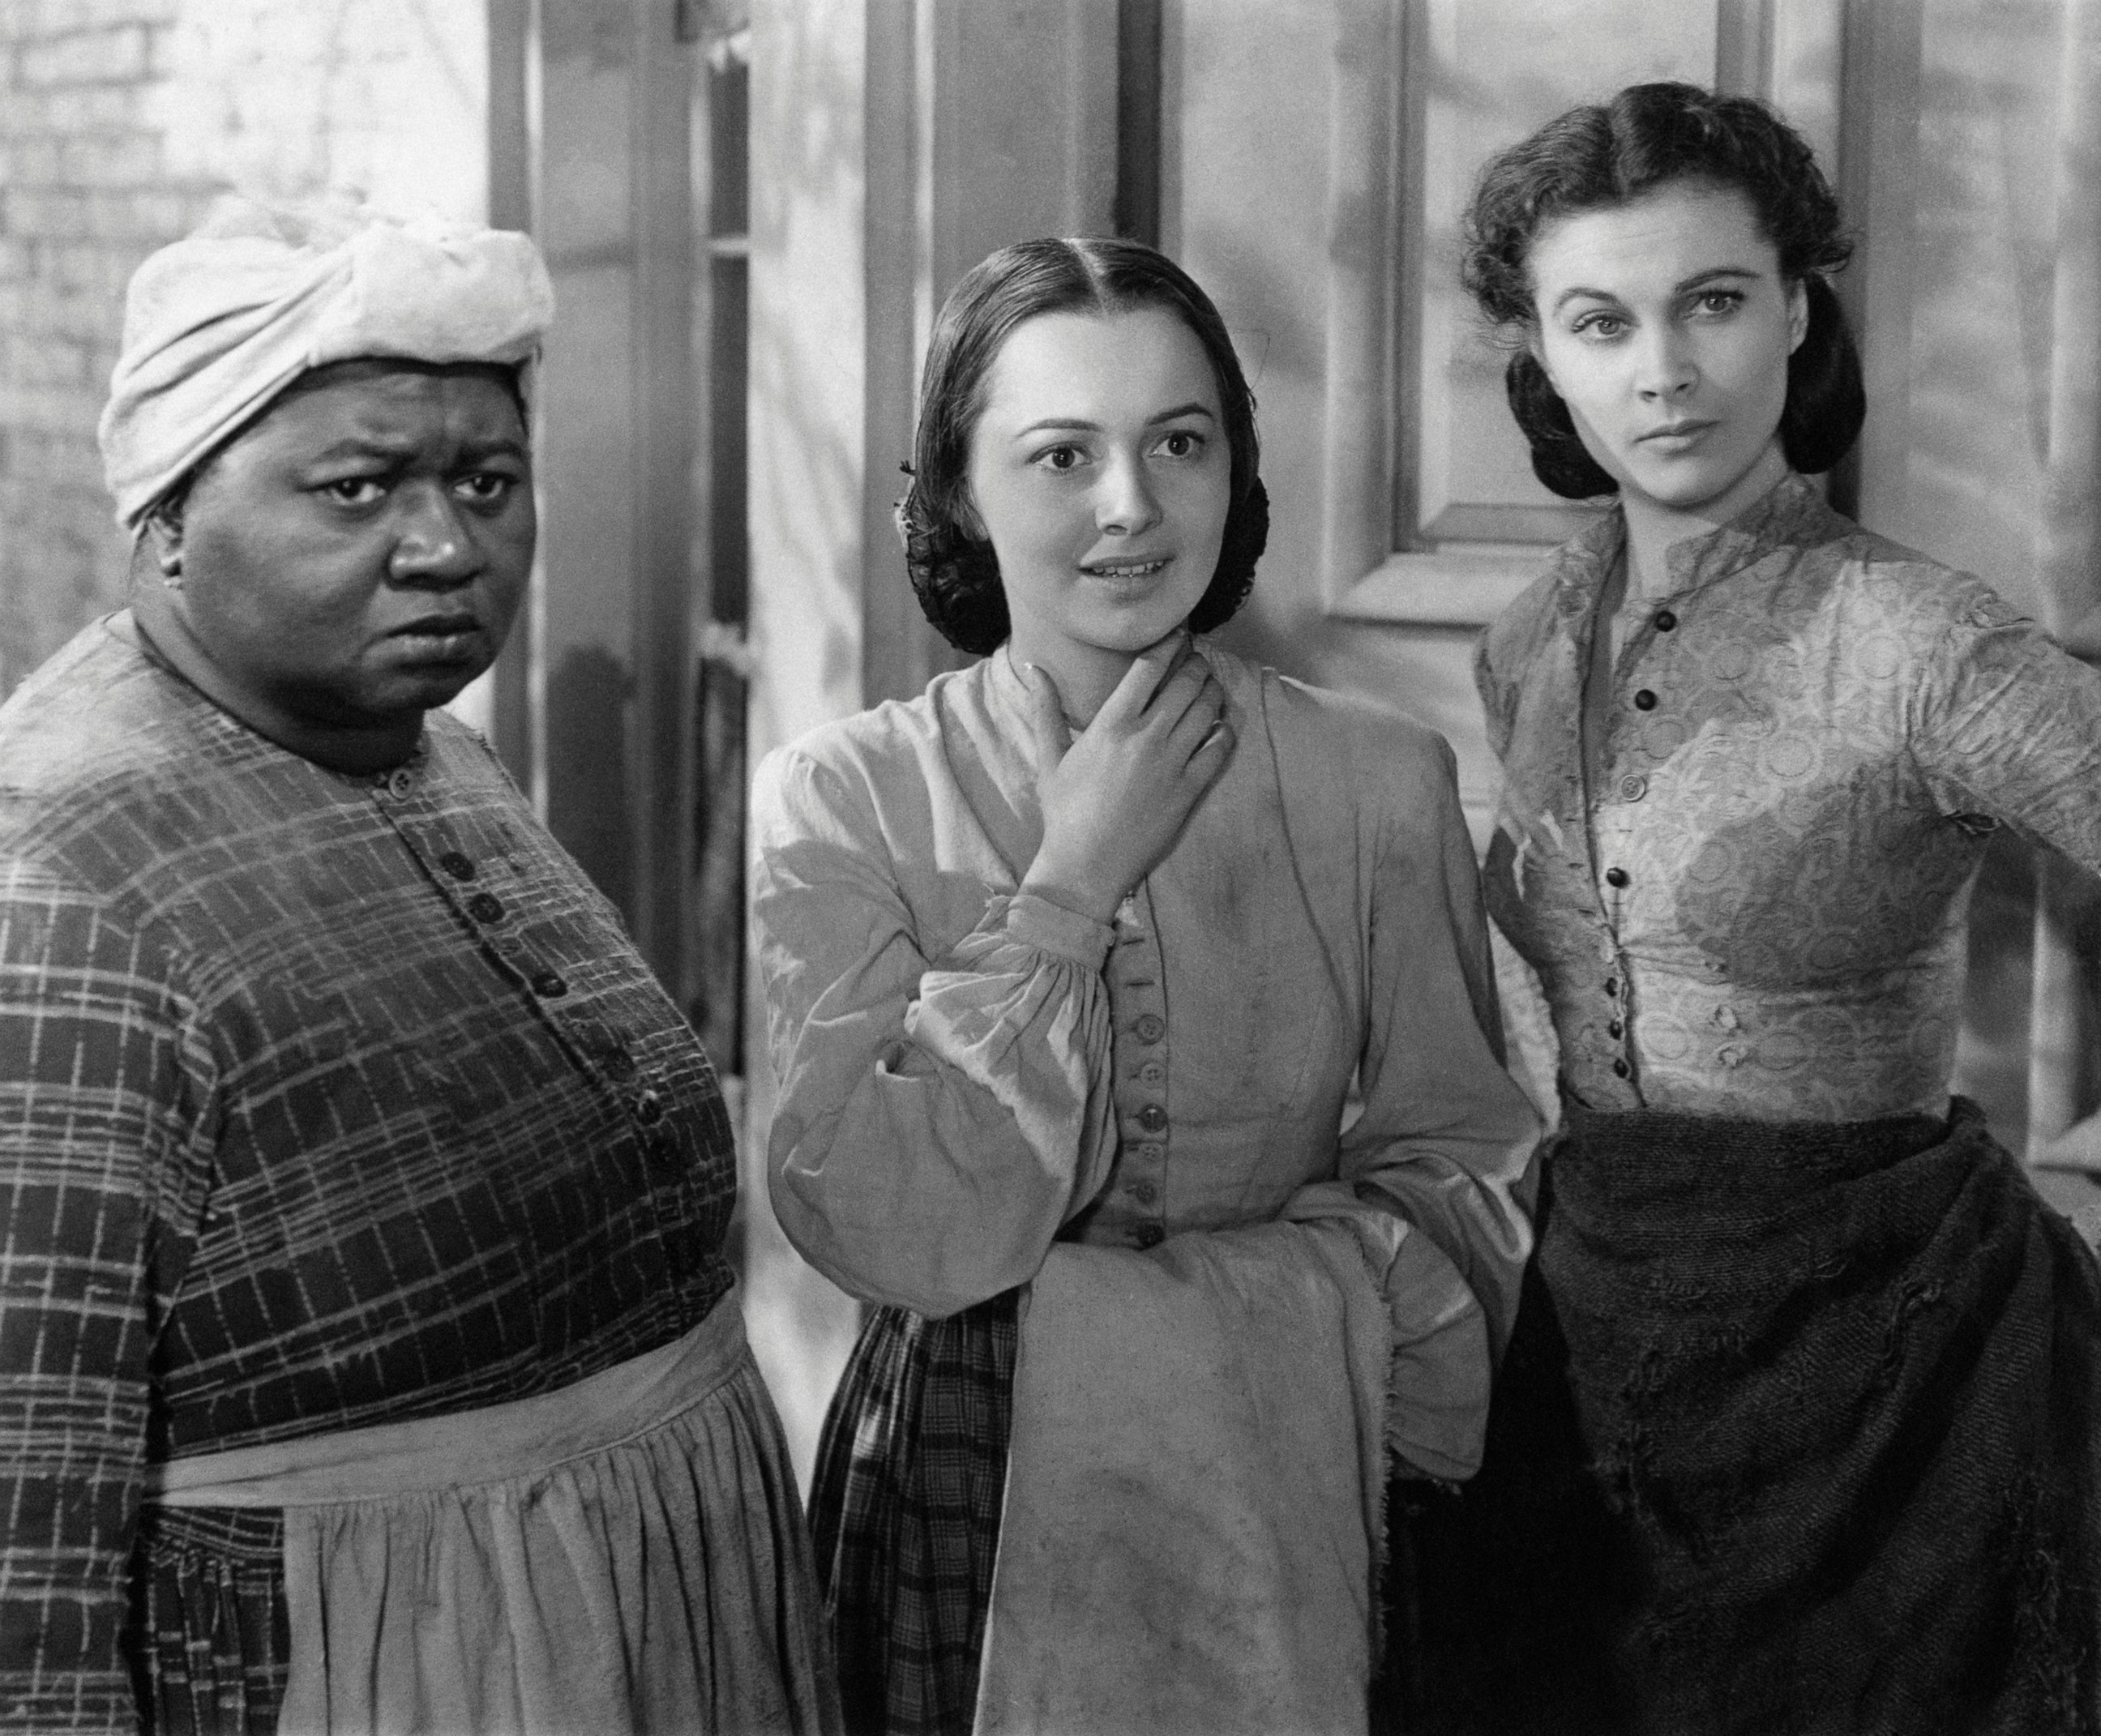 PHOTO: Actresses Vivien Leigh, Olivia De Havilland and Hattie McDaniel play the roles of Scarlett O'Hara, Melanie Hamilton and Mammy respectively in a scene from the 1939 movie "Gone with the Wind."